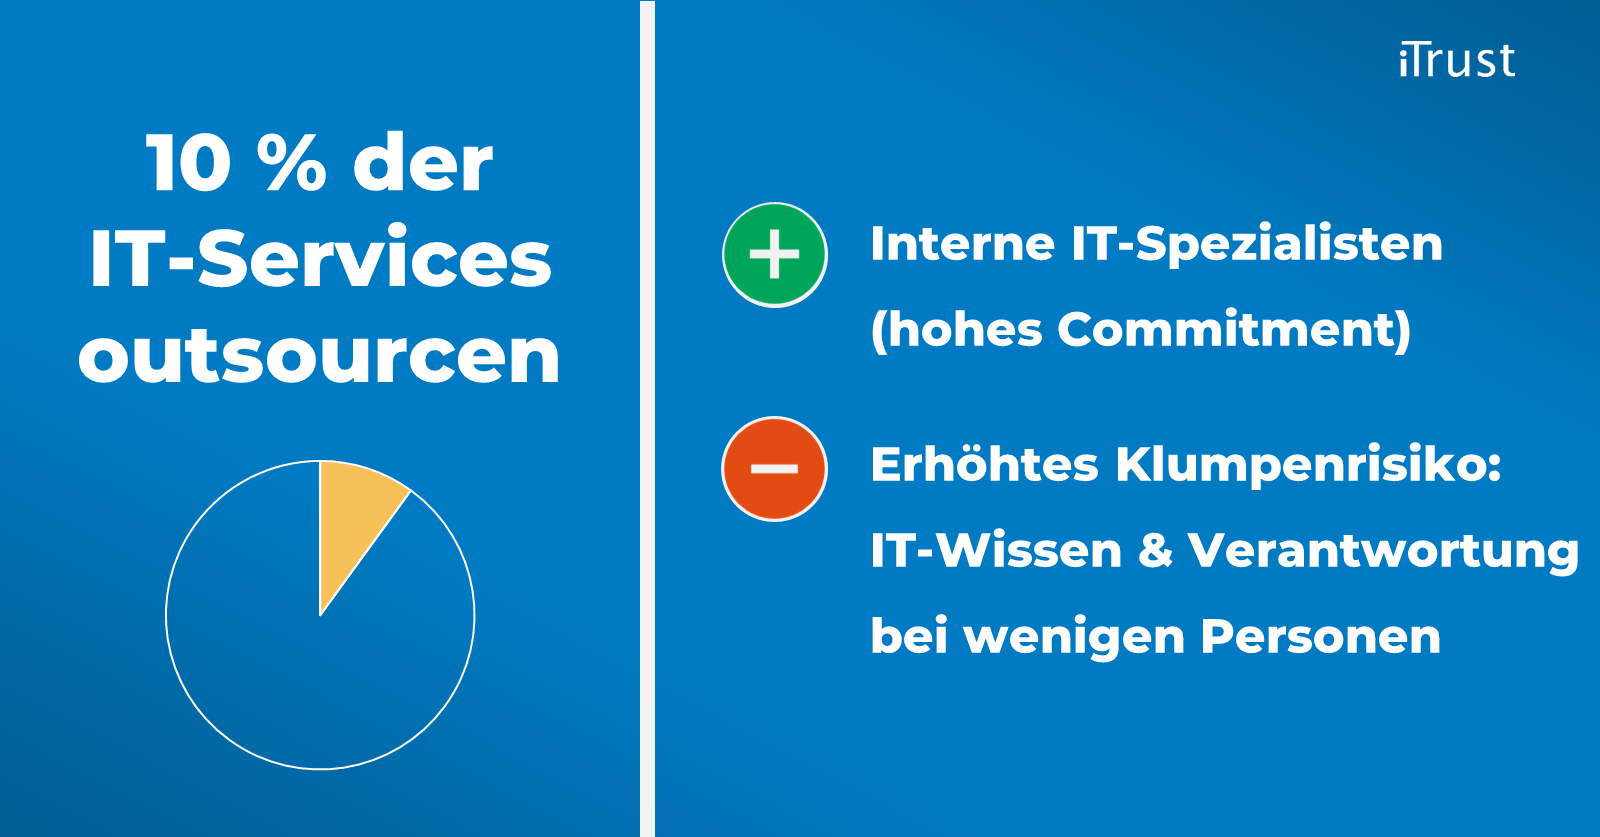 IT-Services outsourcen: Das 10%-Outsourcing-Modell